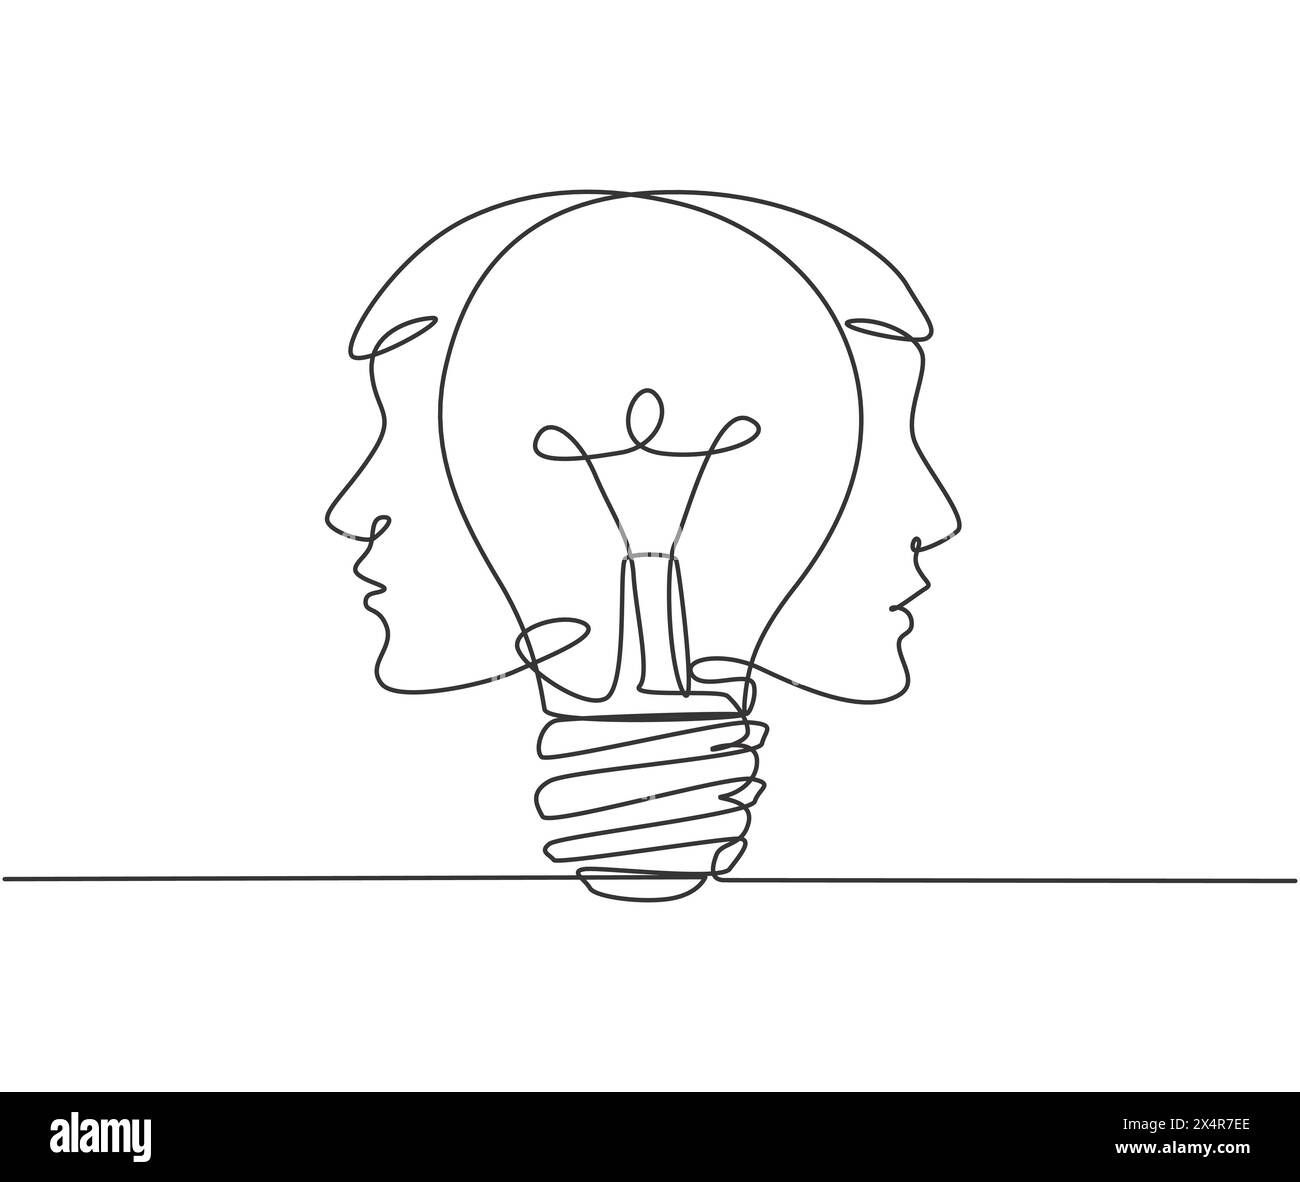 One single line drawing of two men face with light bulb at the center logo identity. Human creativity company logotype icon template concept. Continuo Stock Vector